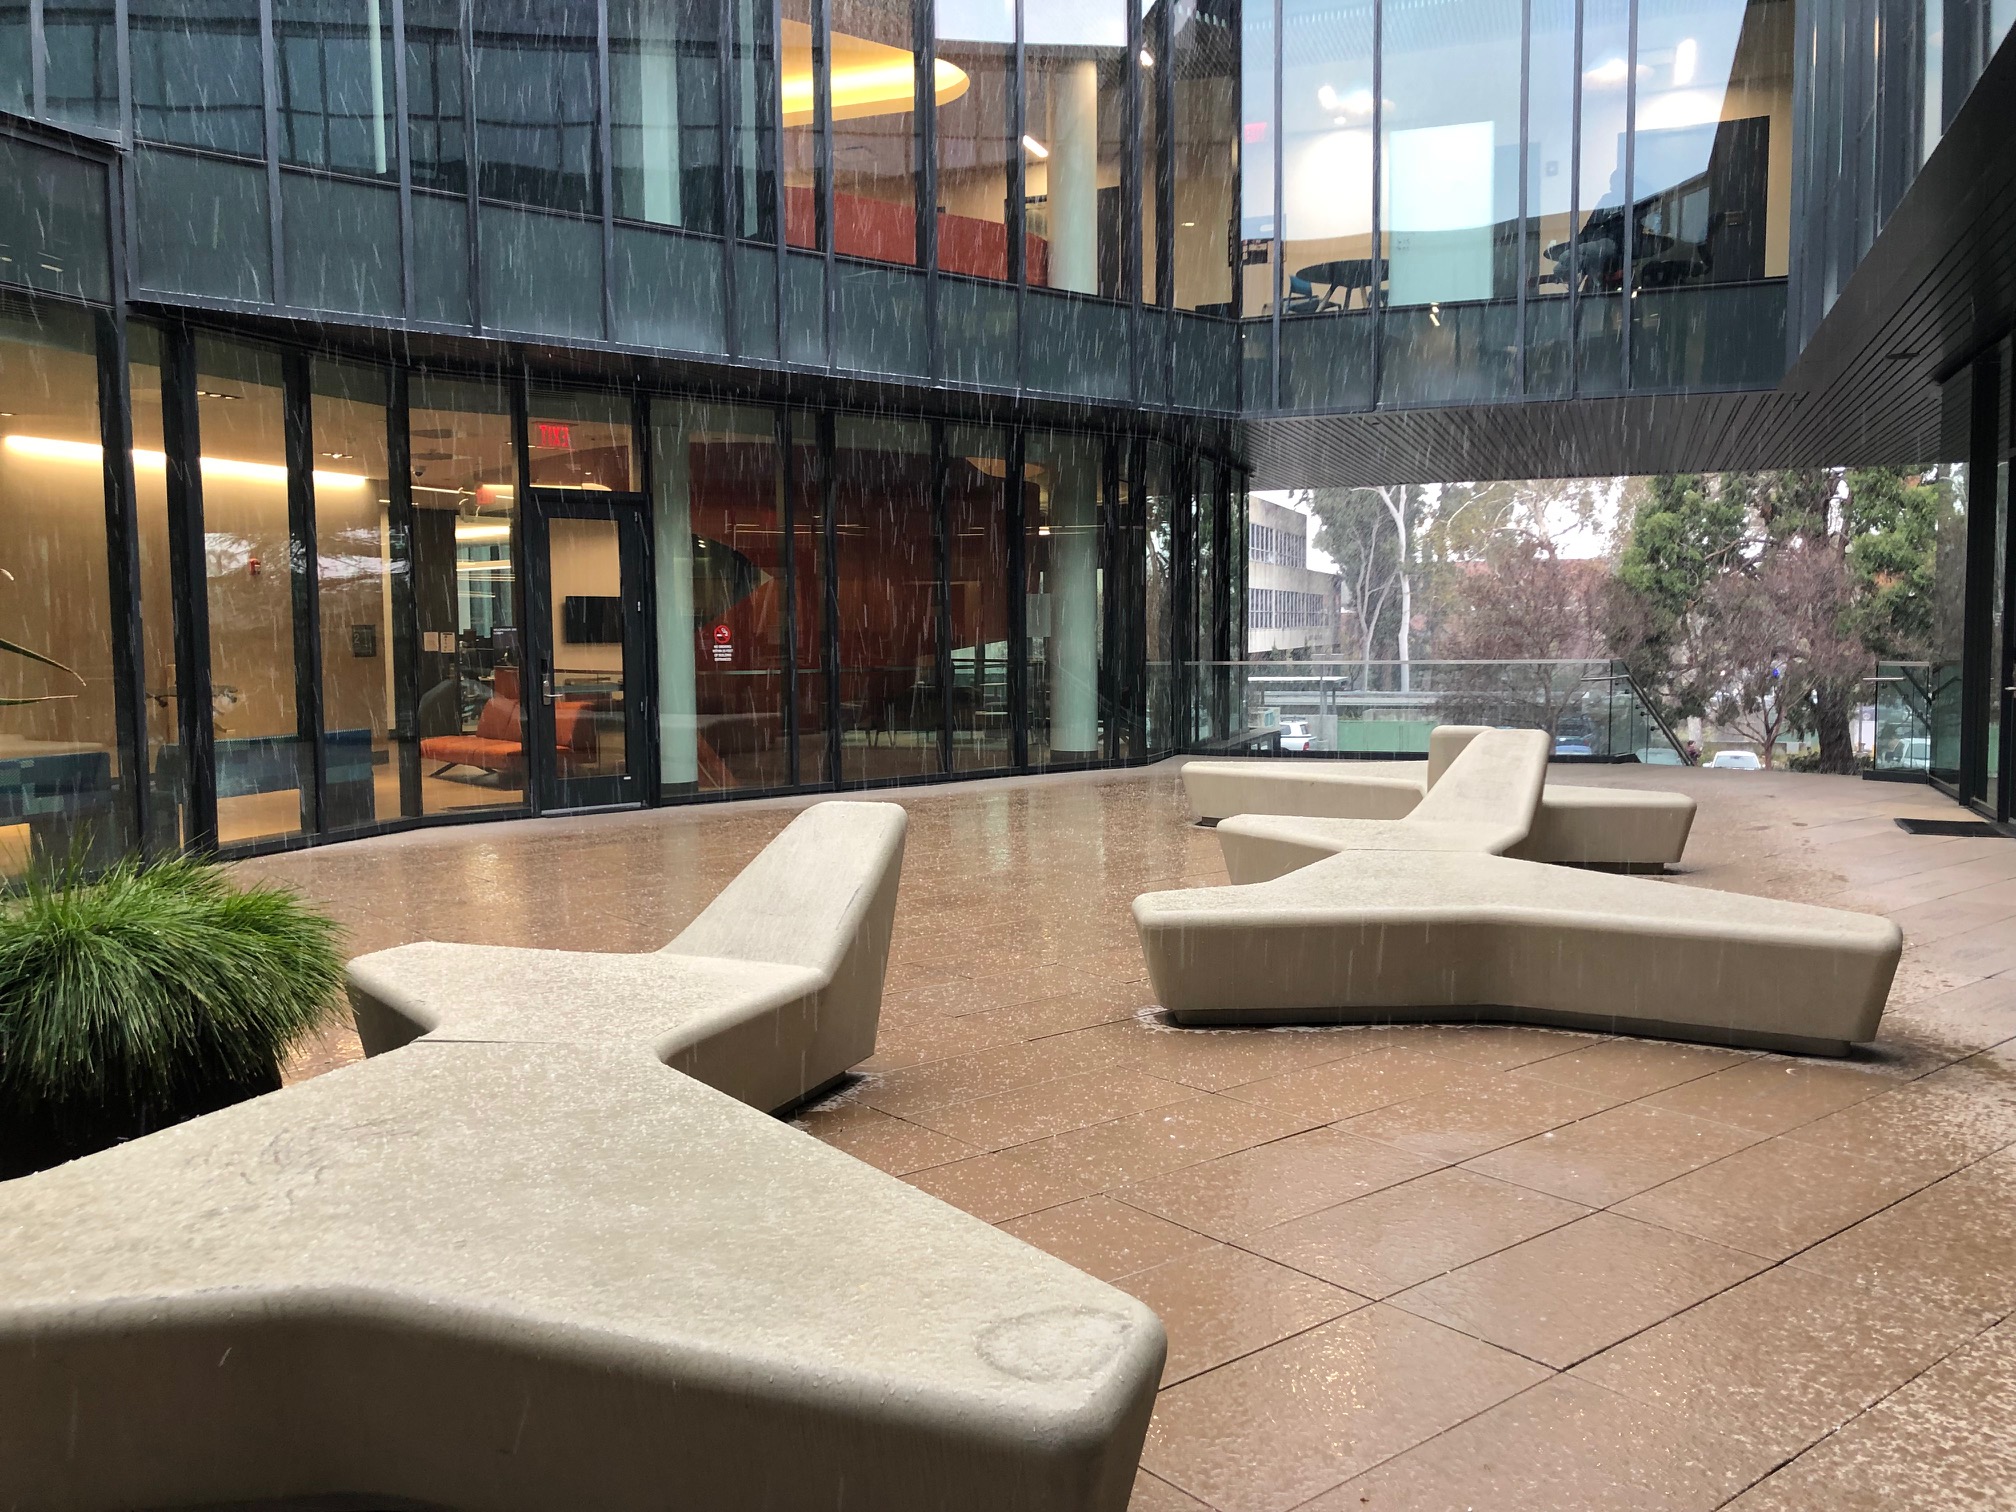 Several concrete benches along a courtyard with windowed walls behind them.